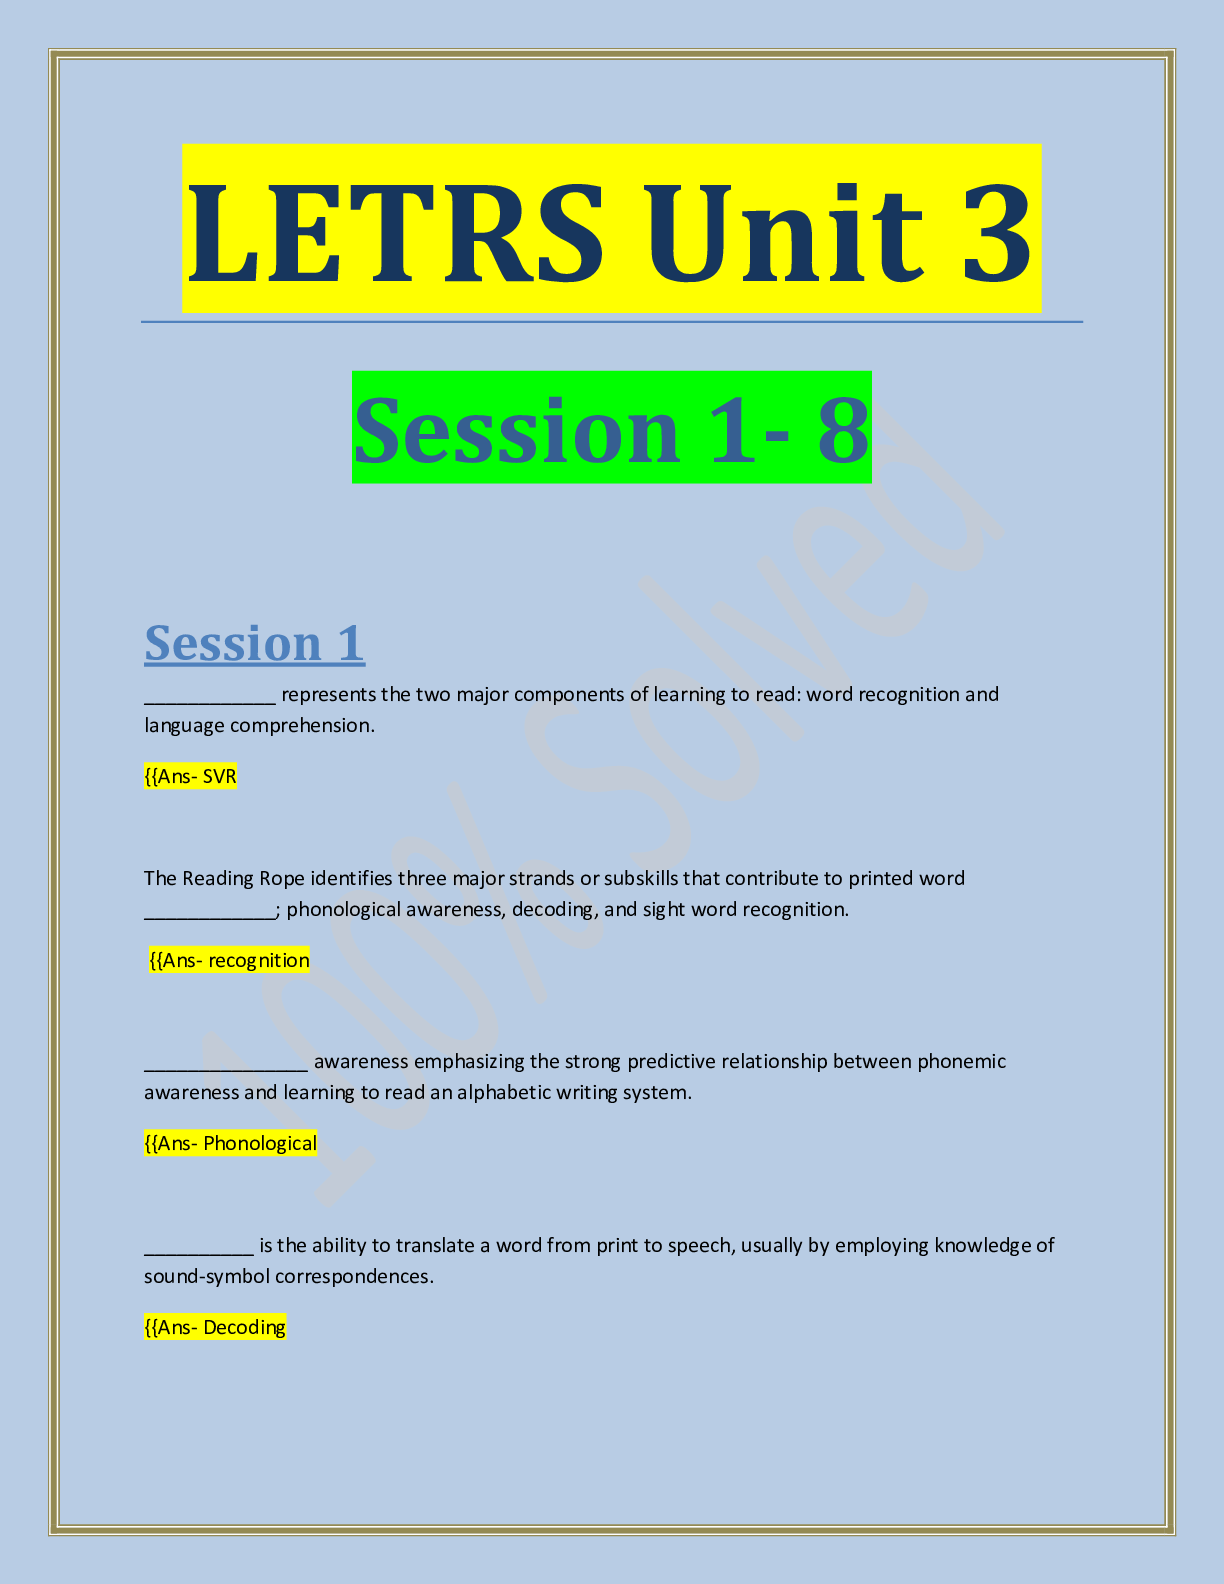 LETRS Unit 3 Session 1 8 Questions and Answers 100% Verified